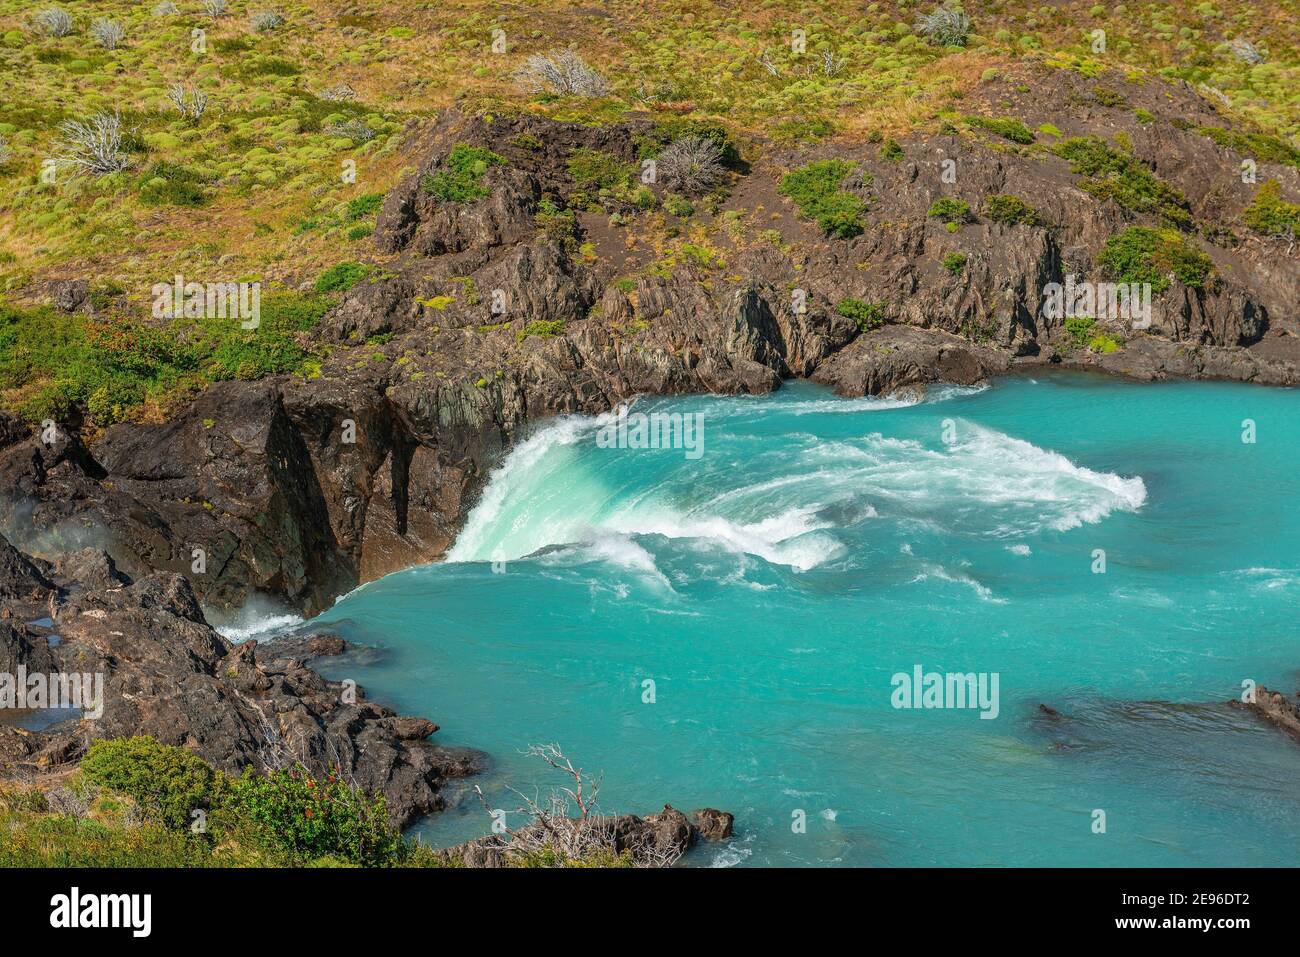 Salto Grande waterfall, Torres del Paine national park, Patagonia, Chile. Stock Photo